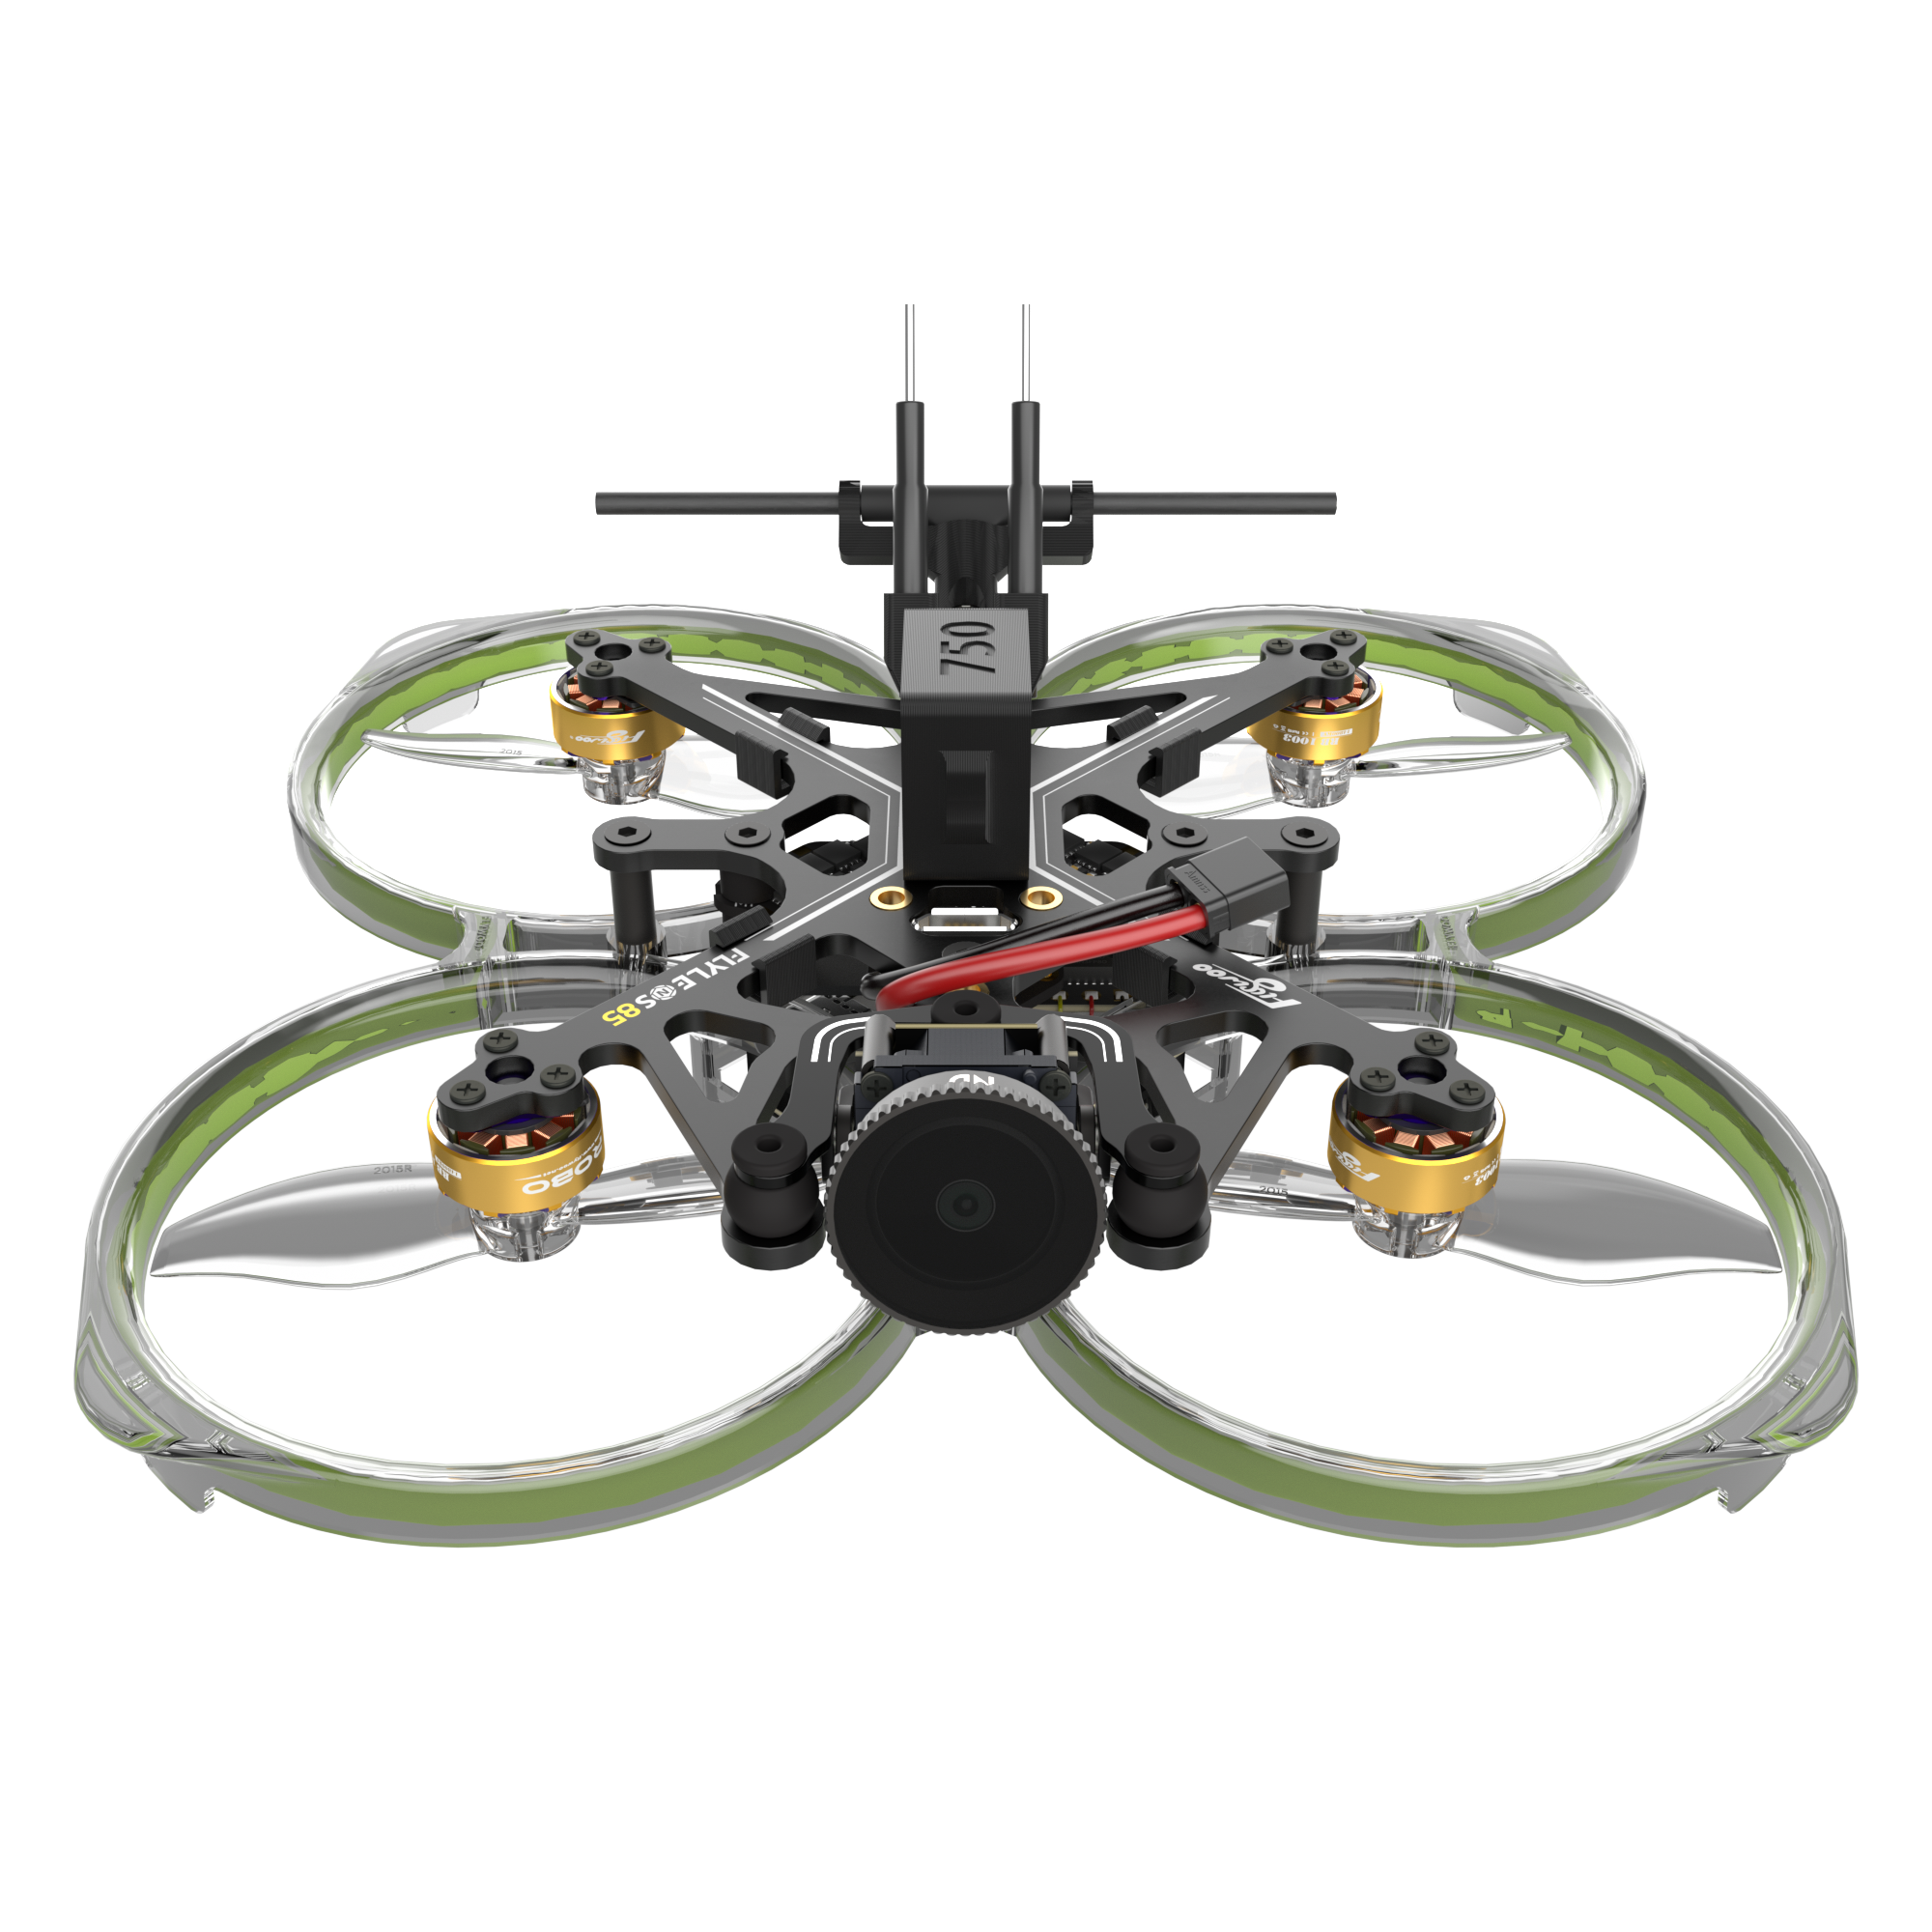 FlyLens 85 HD O3 Lite 2S Brushless Whoop FPV Drone